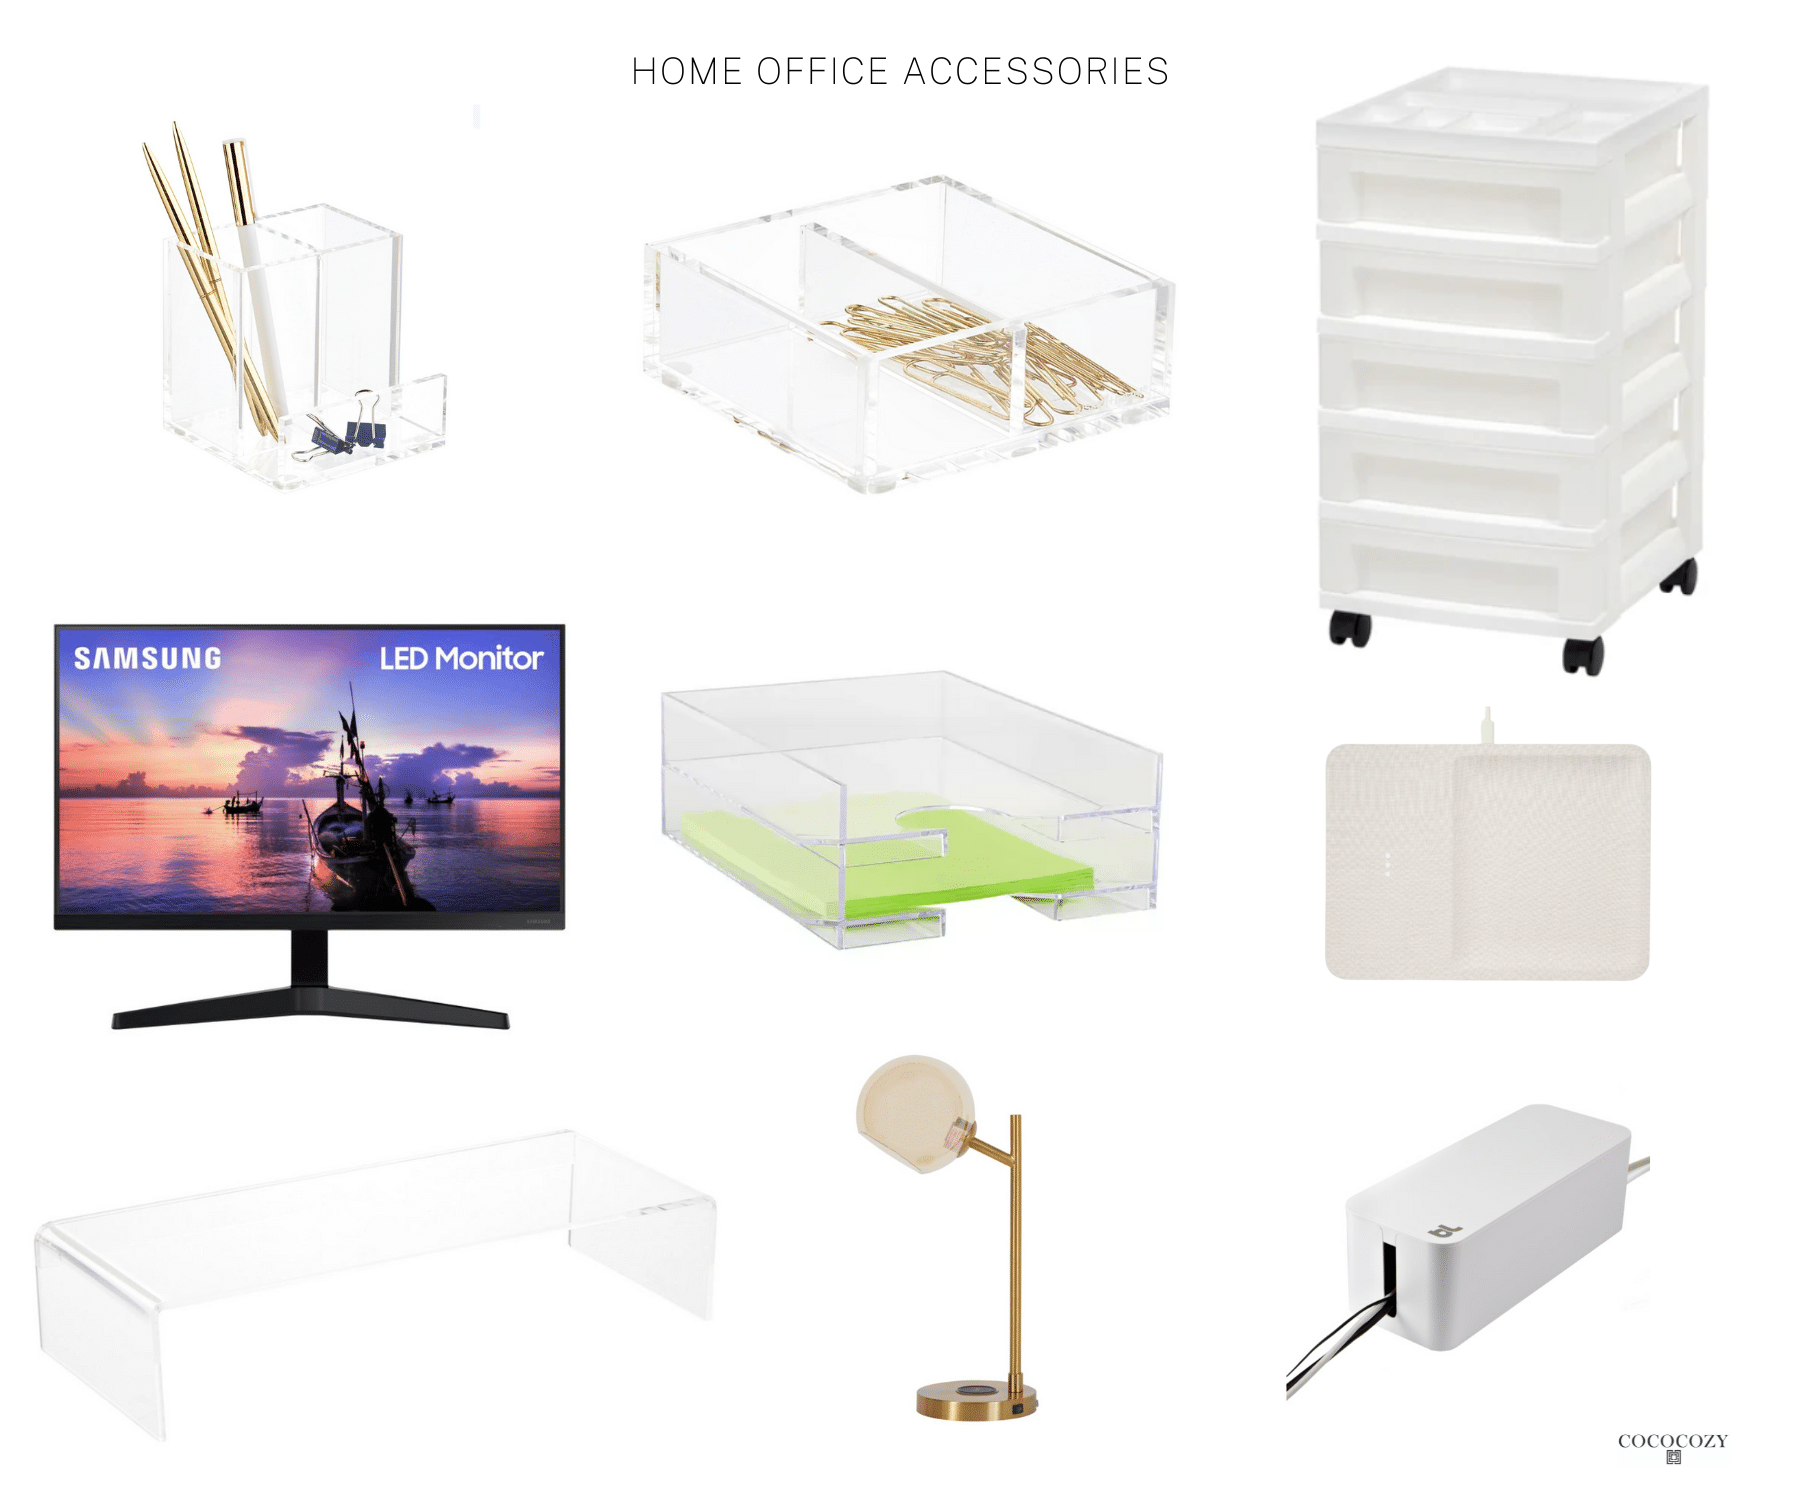 https://cococozy.com/wp-content/uploads/2022/12/home-office-idea-accessories-2023-office-makeover-cocococyz.png